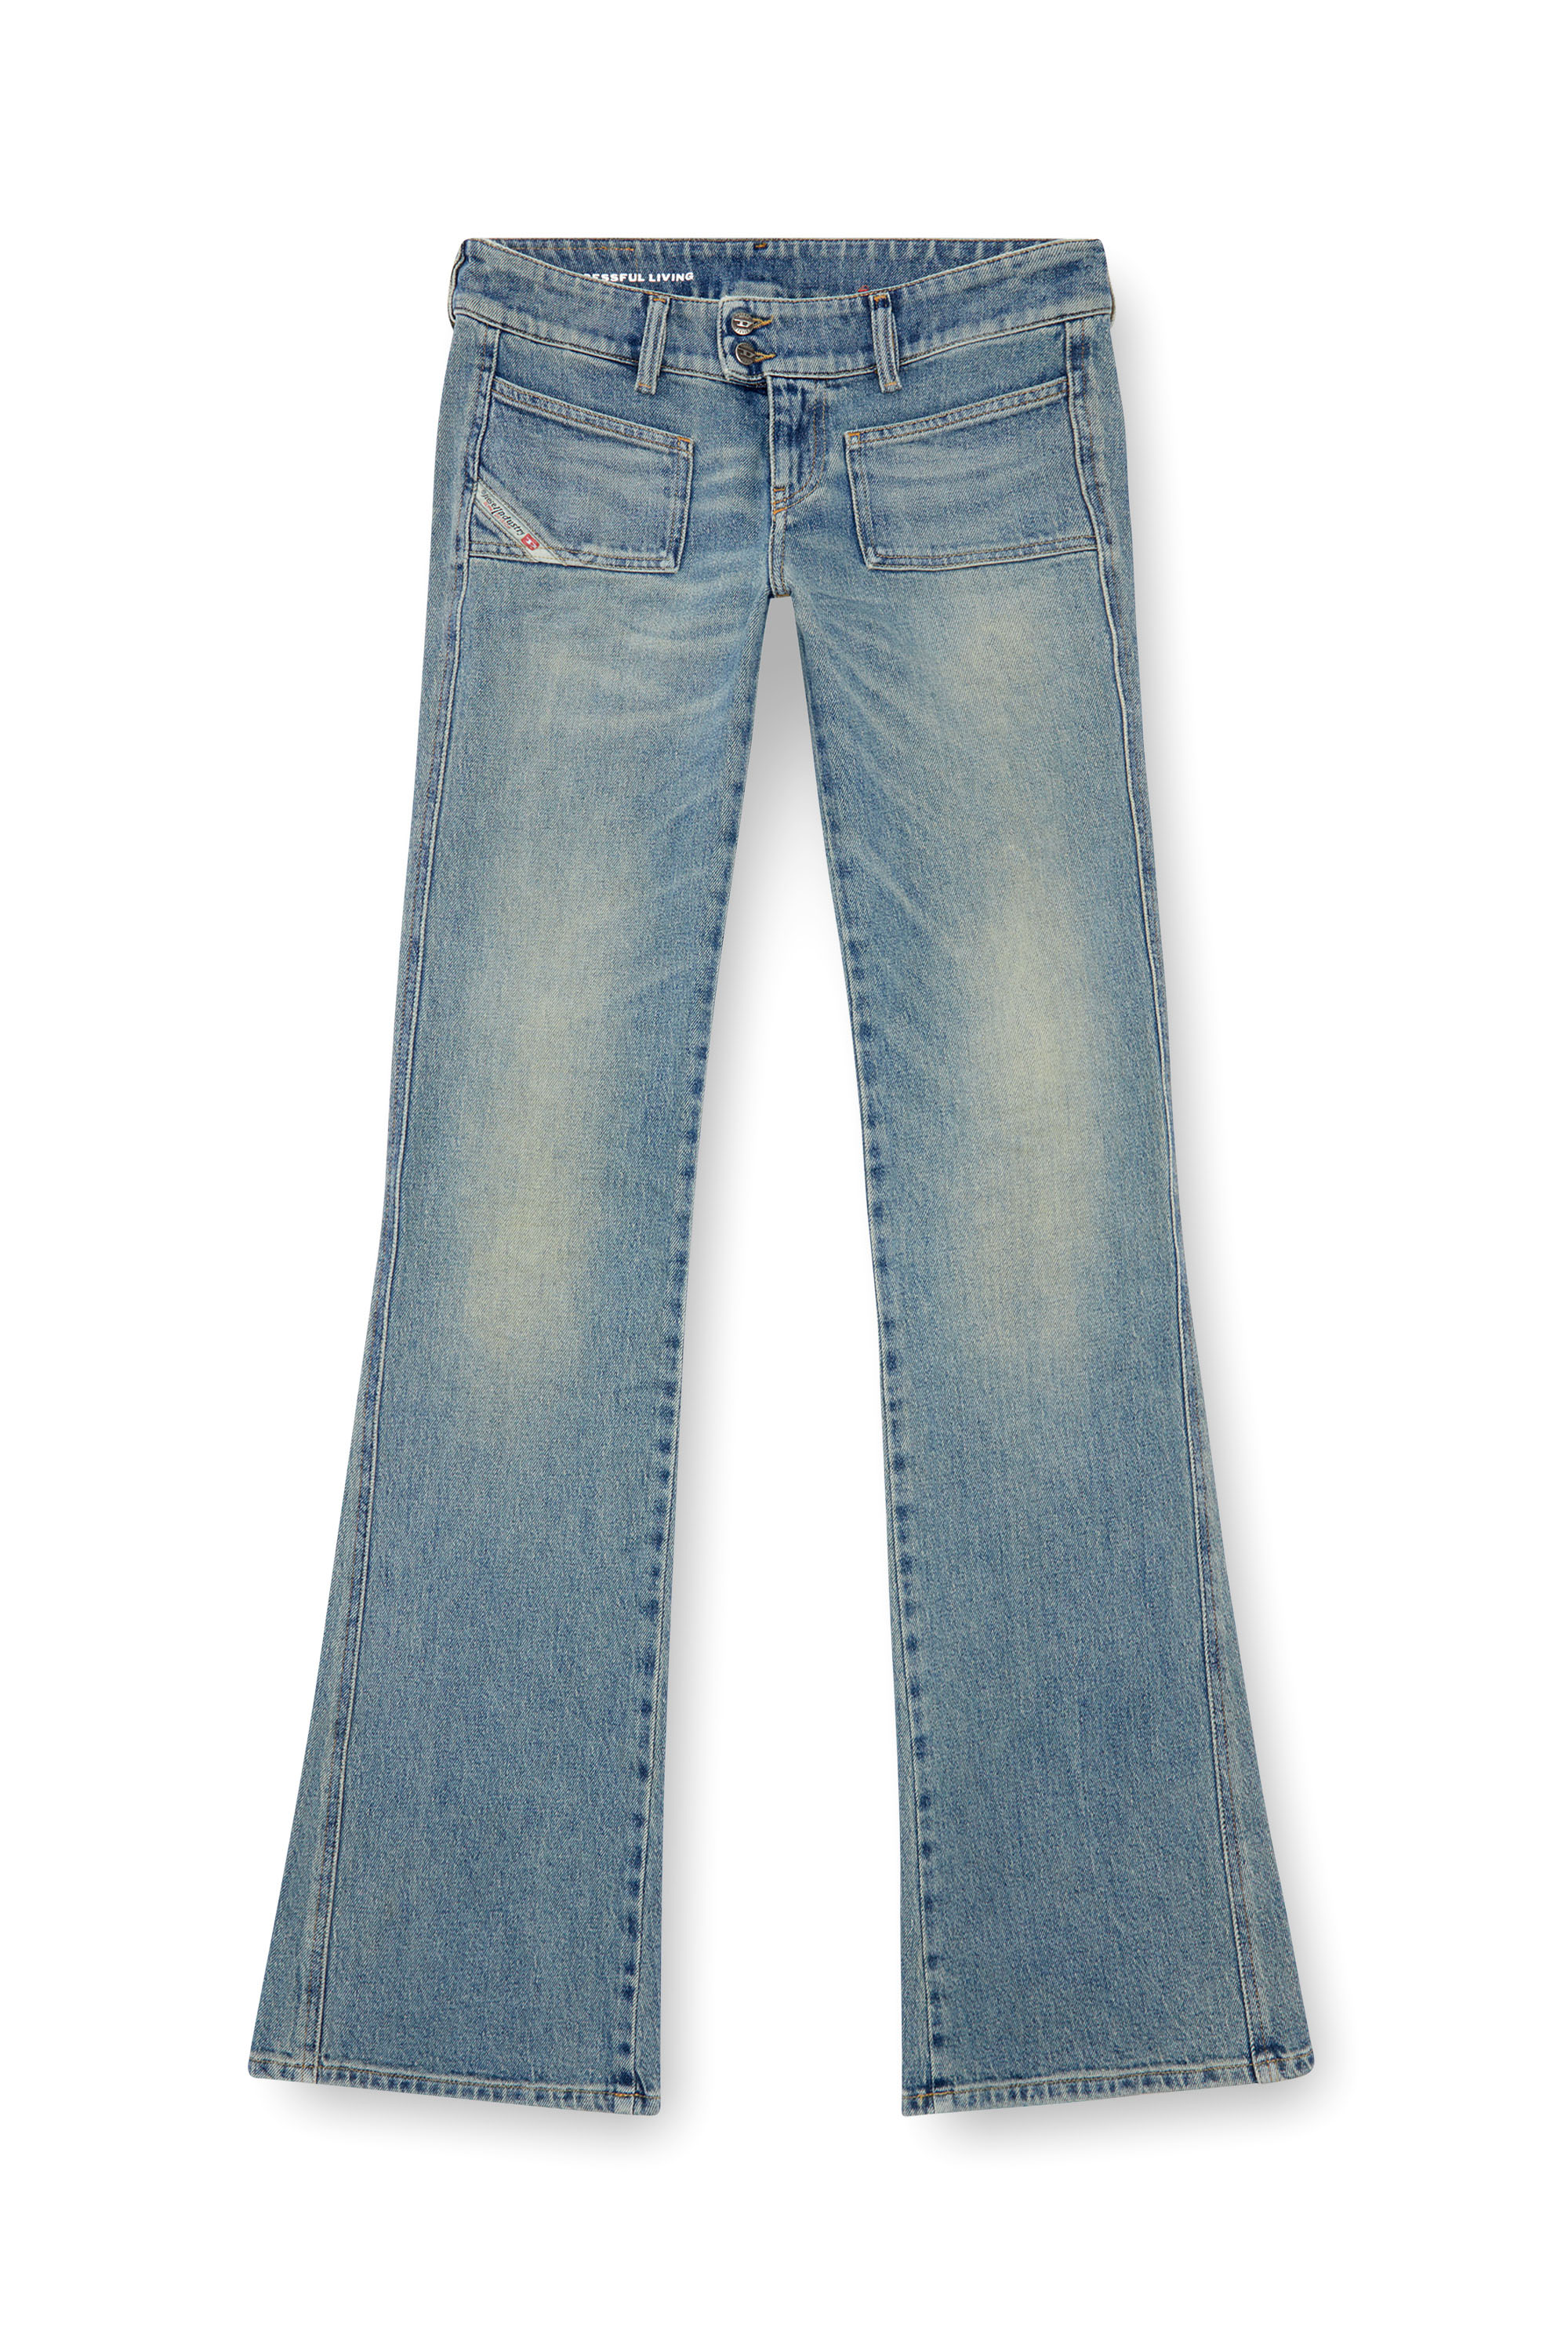 Diesel - Bootcut and Flare Jeans D-Hush 09J55, Mujer Bootcut y Flare Jeans - D-Hush in Azul marino - Image 5